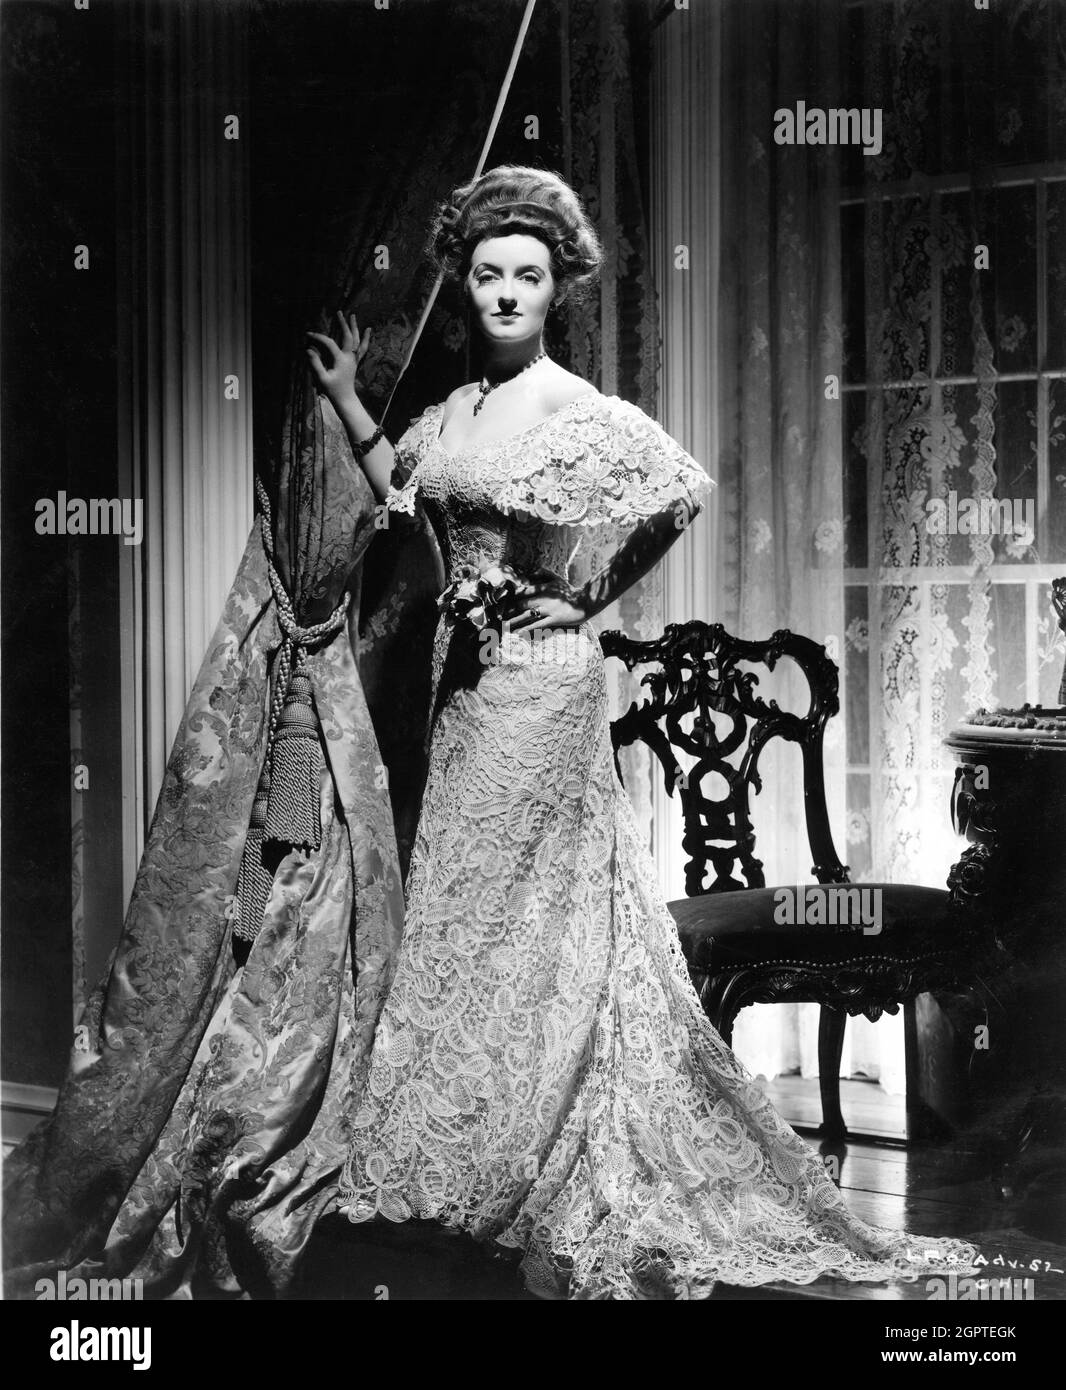 BETTE DAVIS Portrait as Regina Giddens by GEORGE HURRELL in THE LITTLE FOXES 1941 director WILLIAM WYLER play / screenplay Lillian Hellman costume design Orry-Kelly The Samuel Goldwyn Company / RKO Radio Pictures Stock Photo